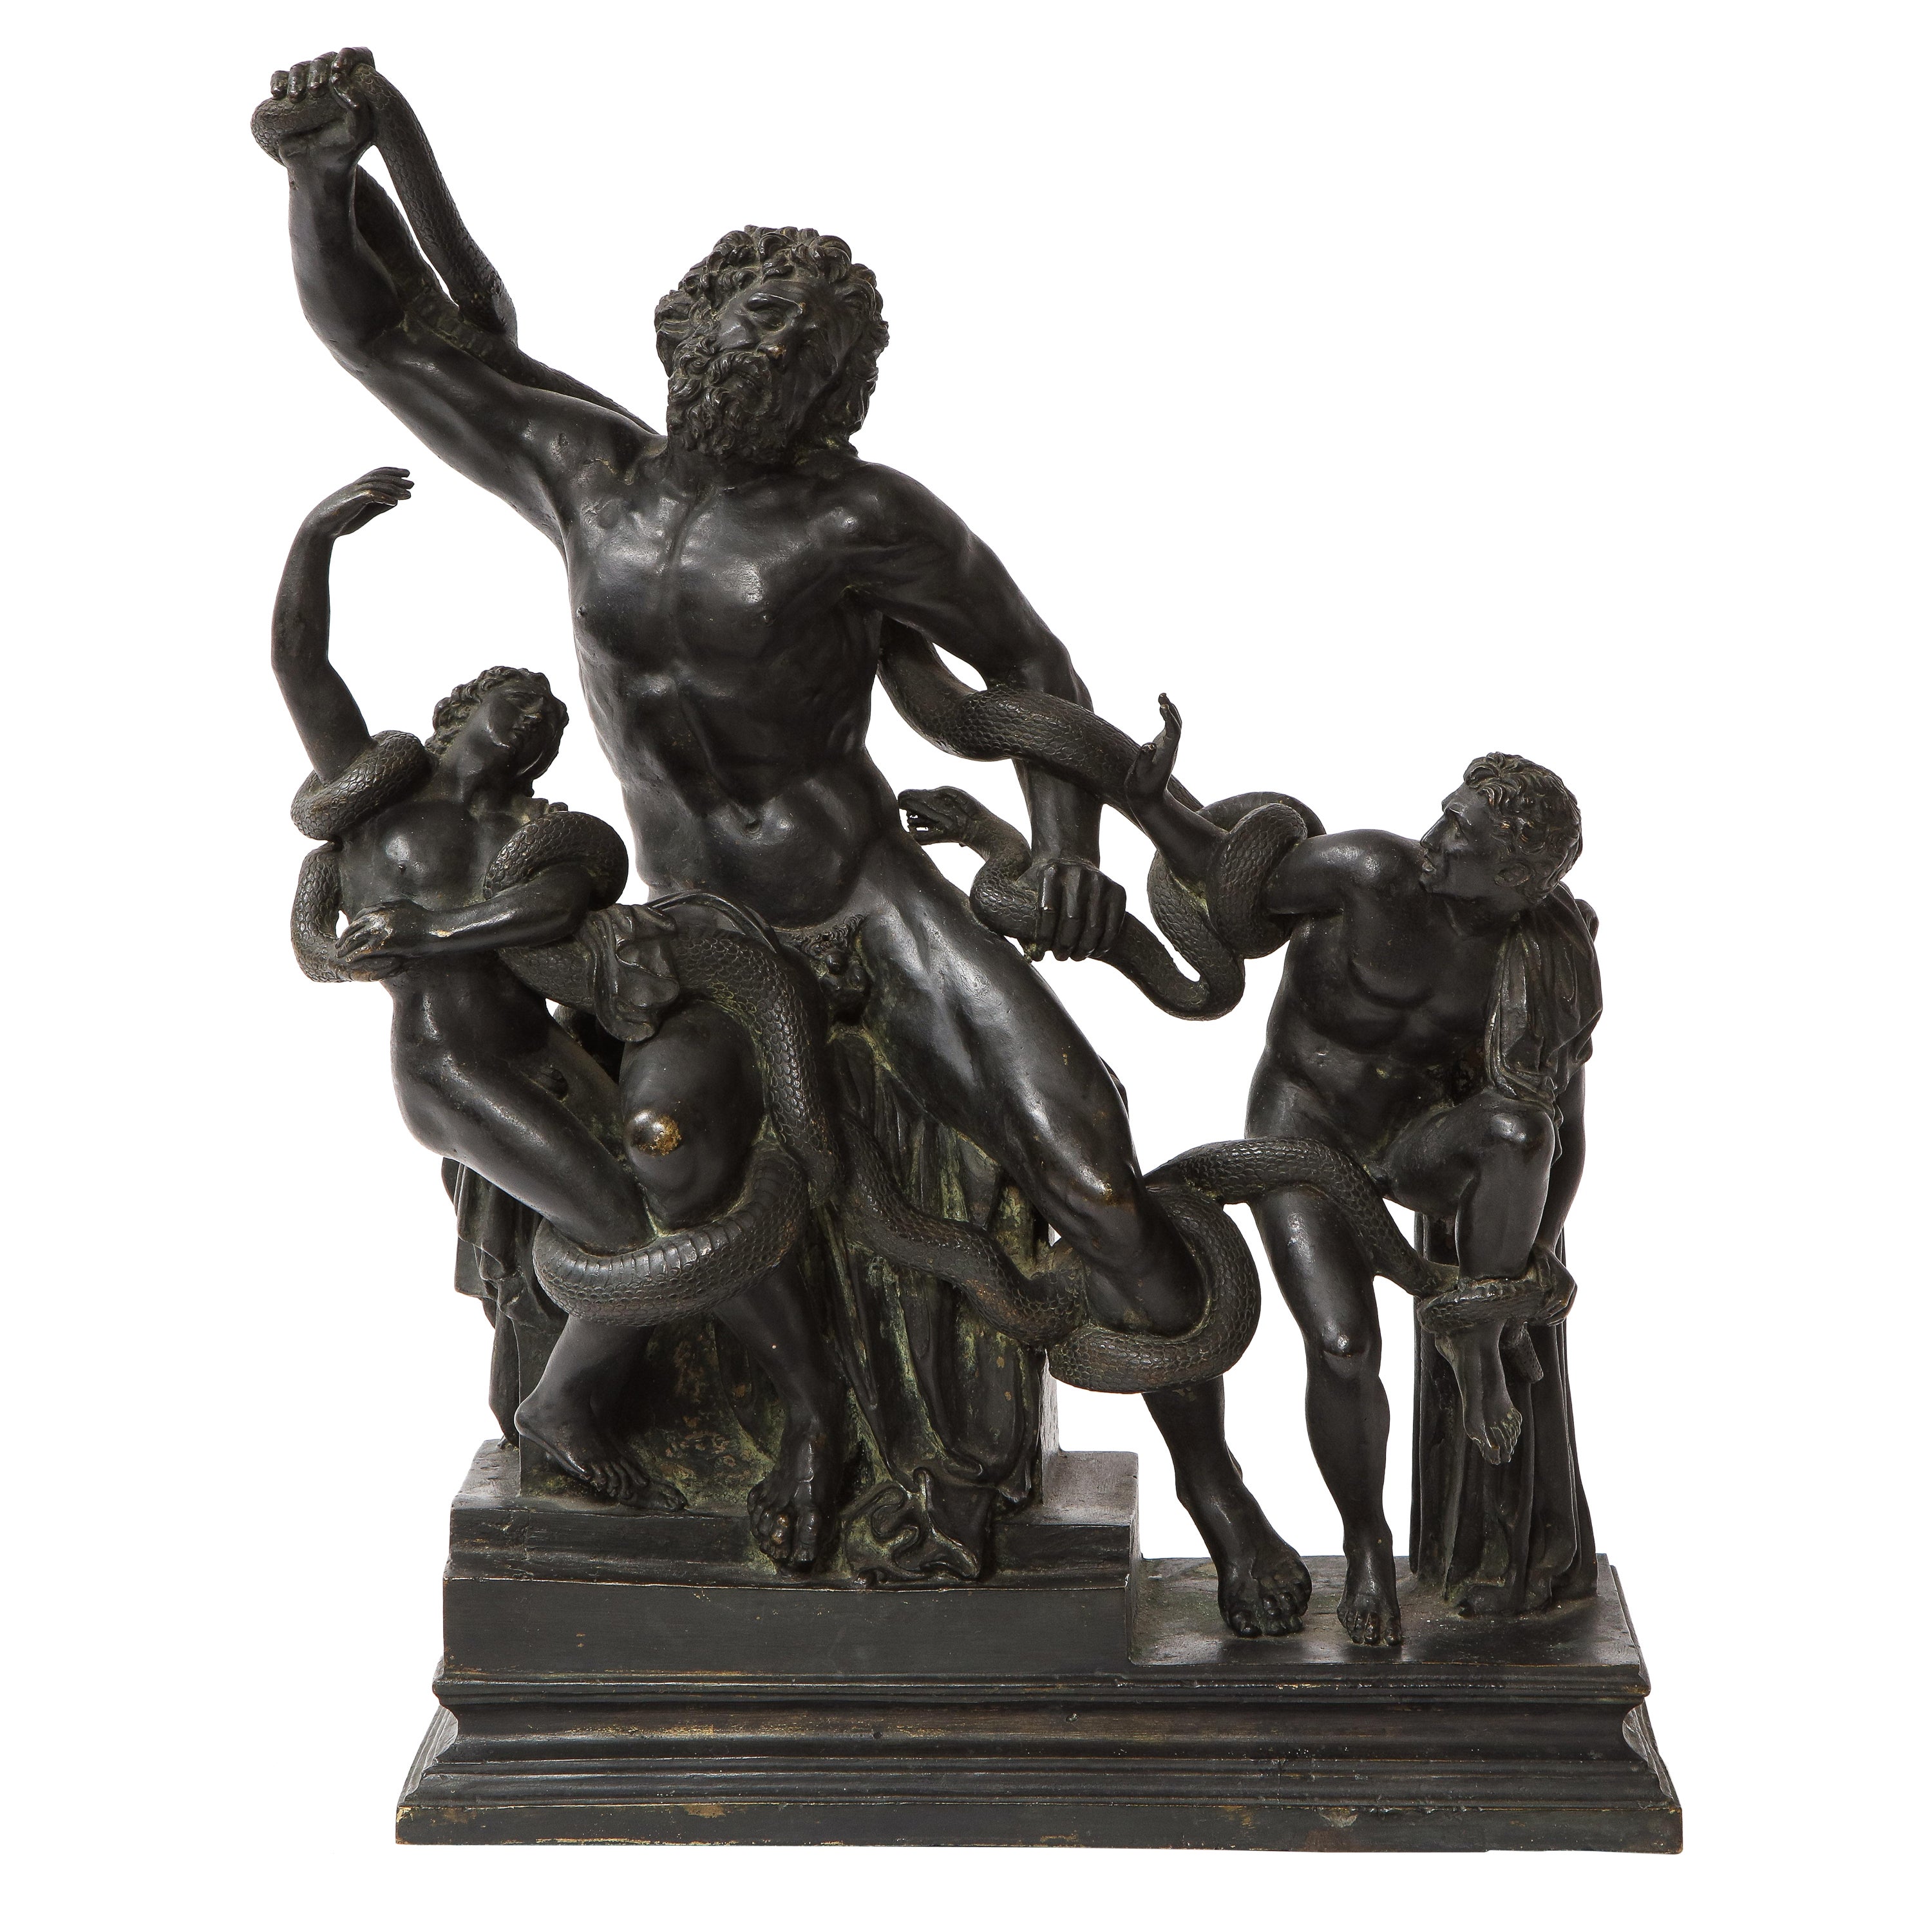 An Early, Late 17th to 18th Century, Patinated Bronze Model of Laocoön